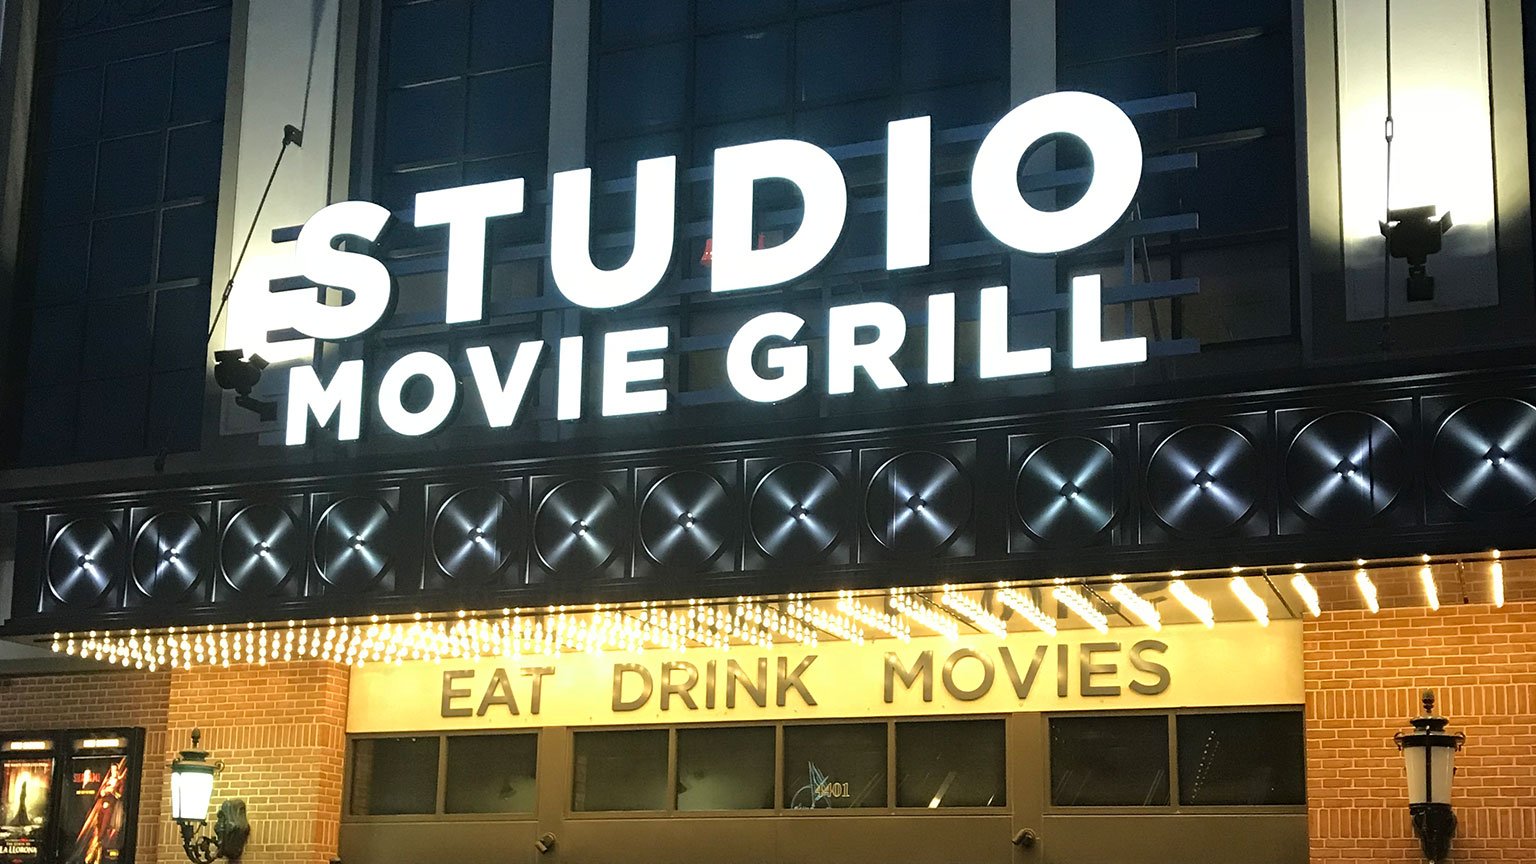 Find the Studio Movie Grill Movie Theater Near You | SMG ...